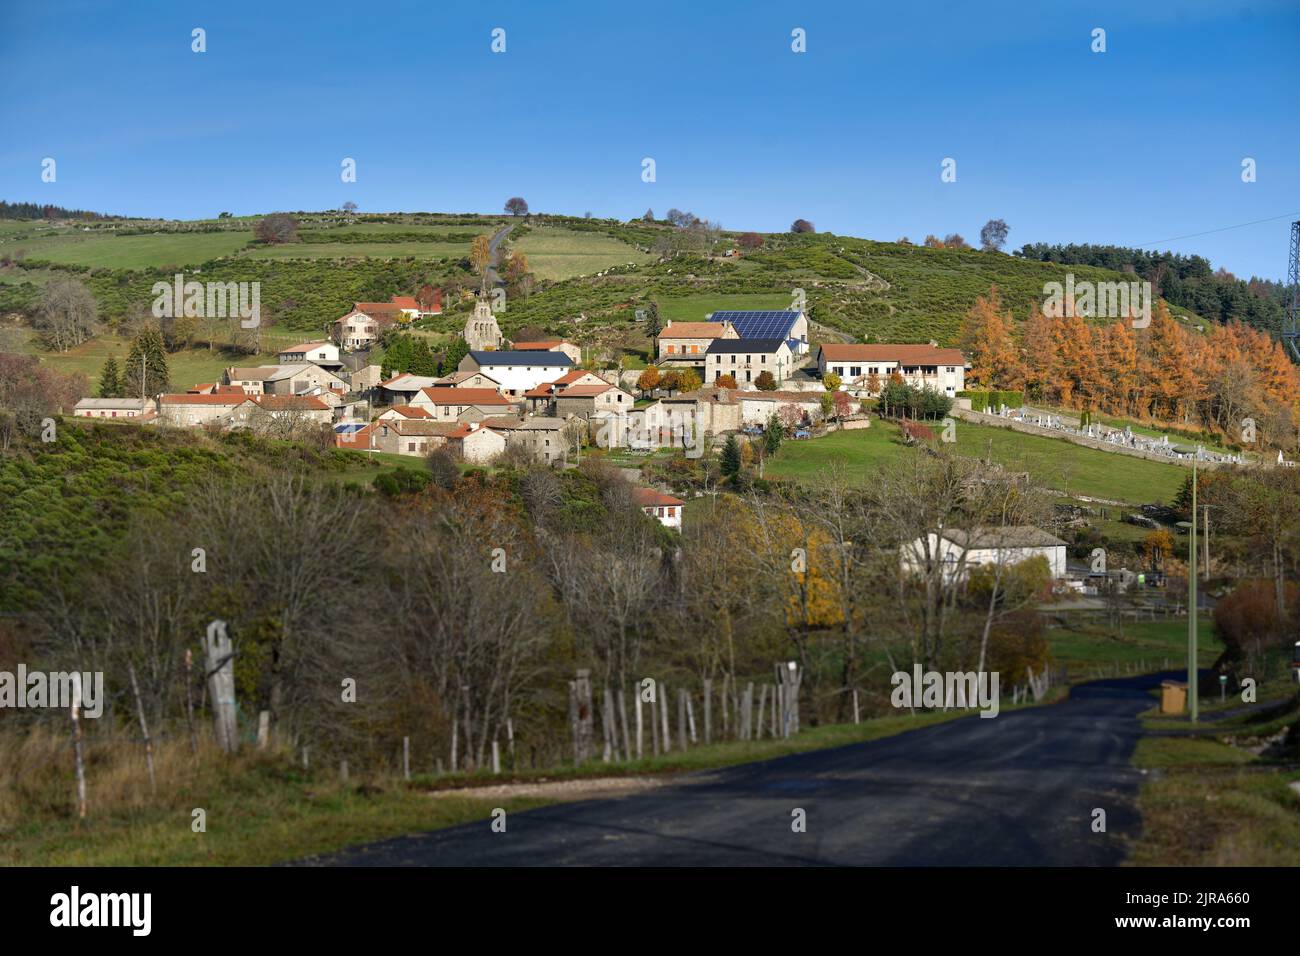 Chanaleilles (south of France): General view of the village. houses and buildings with photovoltaic panels on the roof Stock Photo